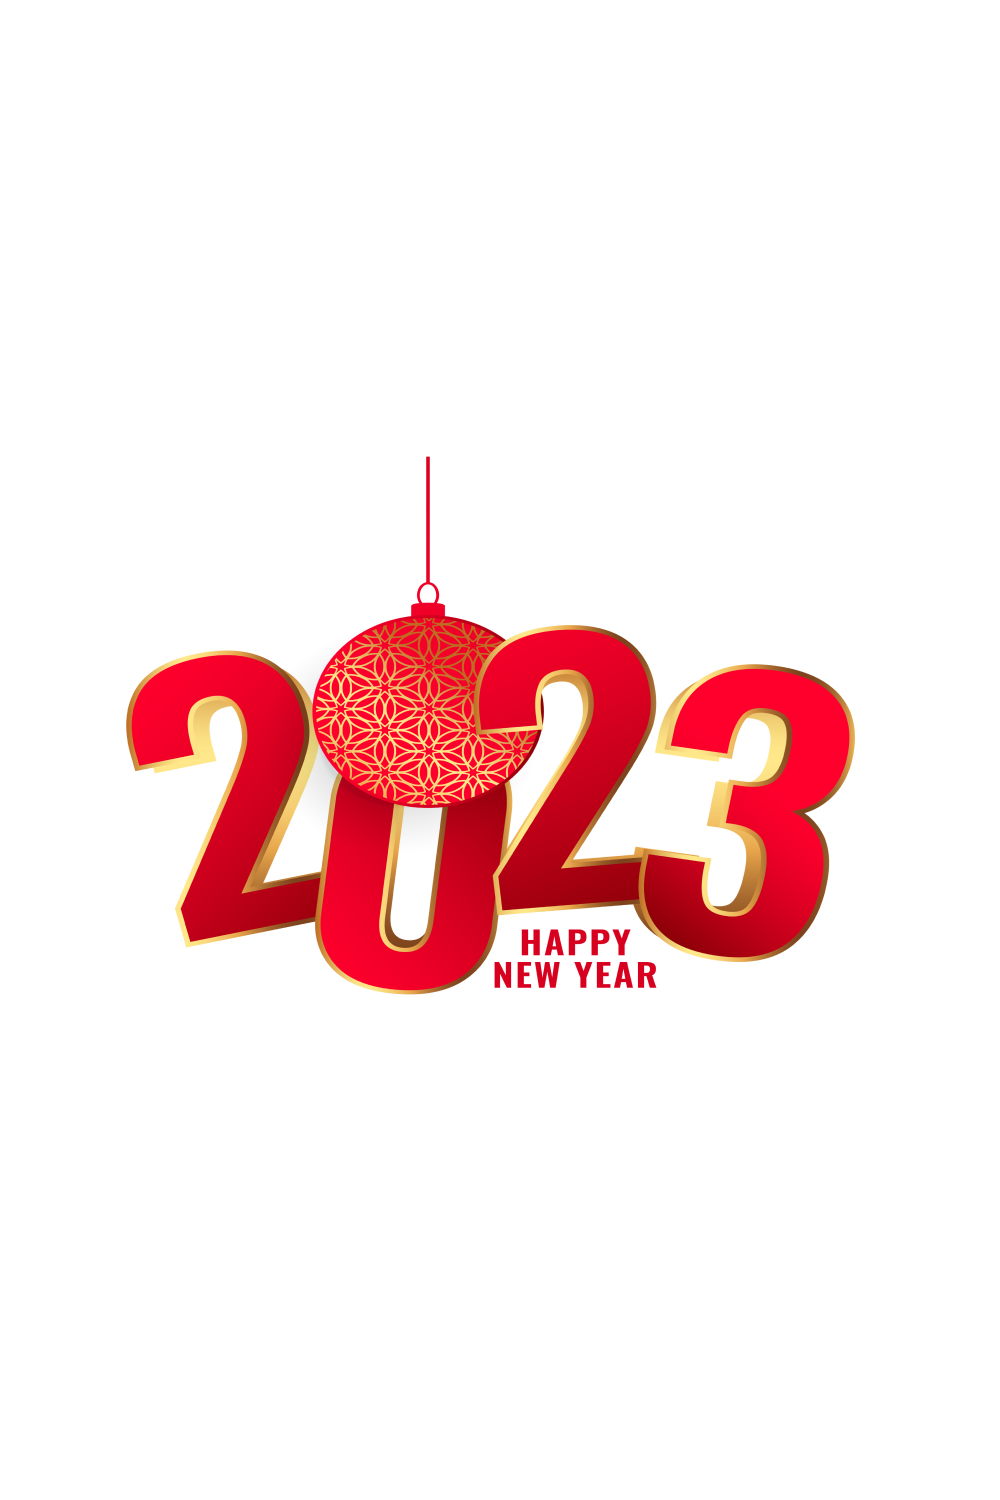 New Year Event Background with 3D Christmas Ball pinterest image.